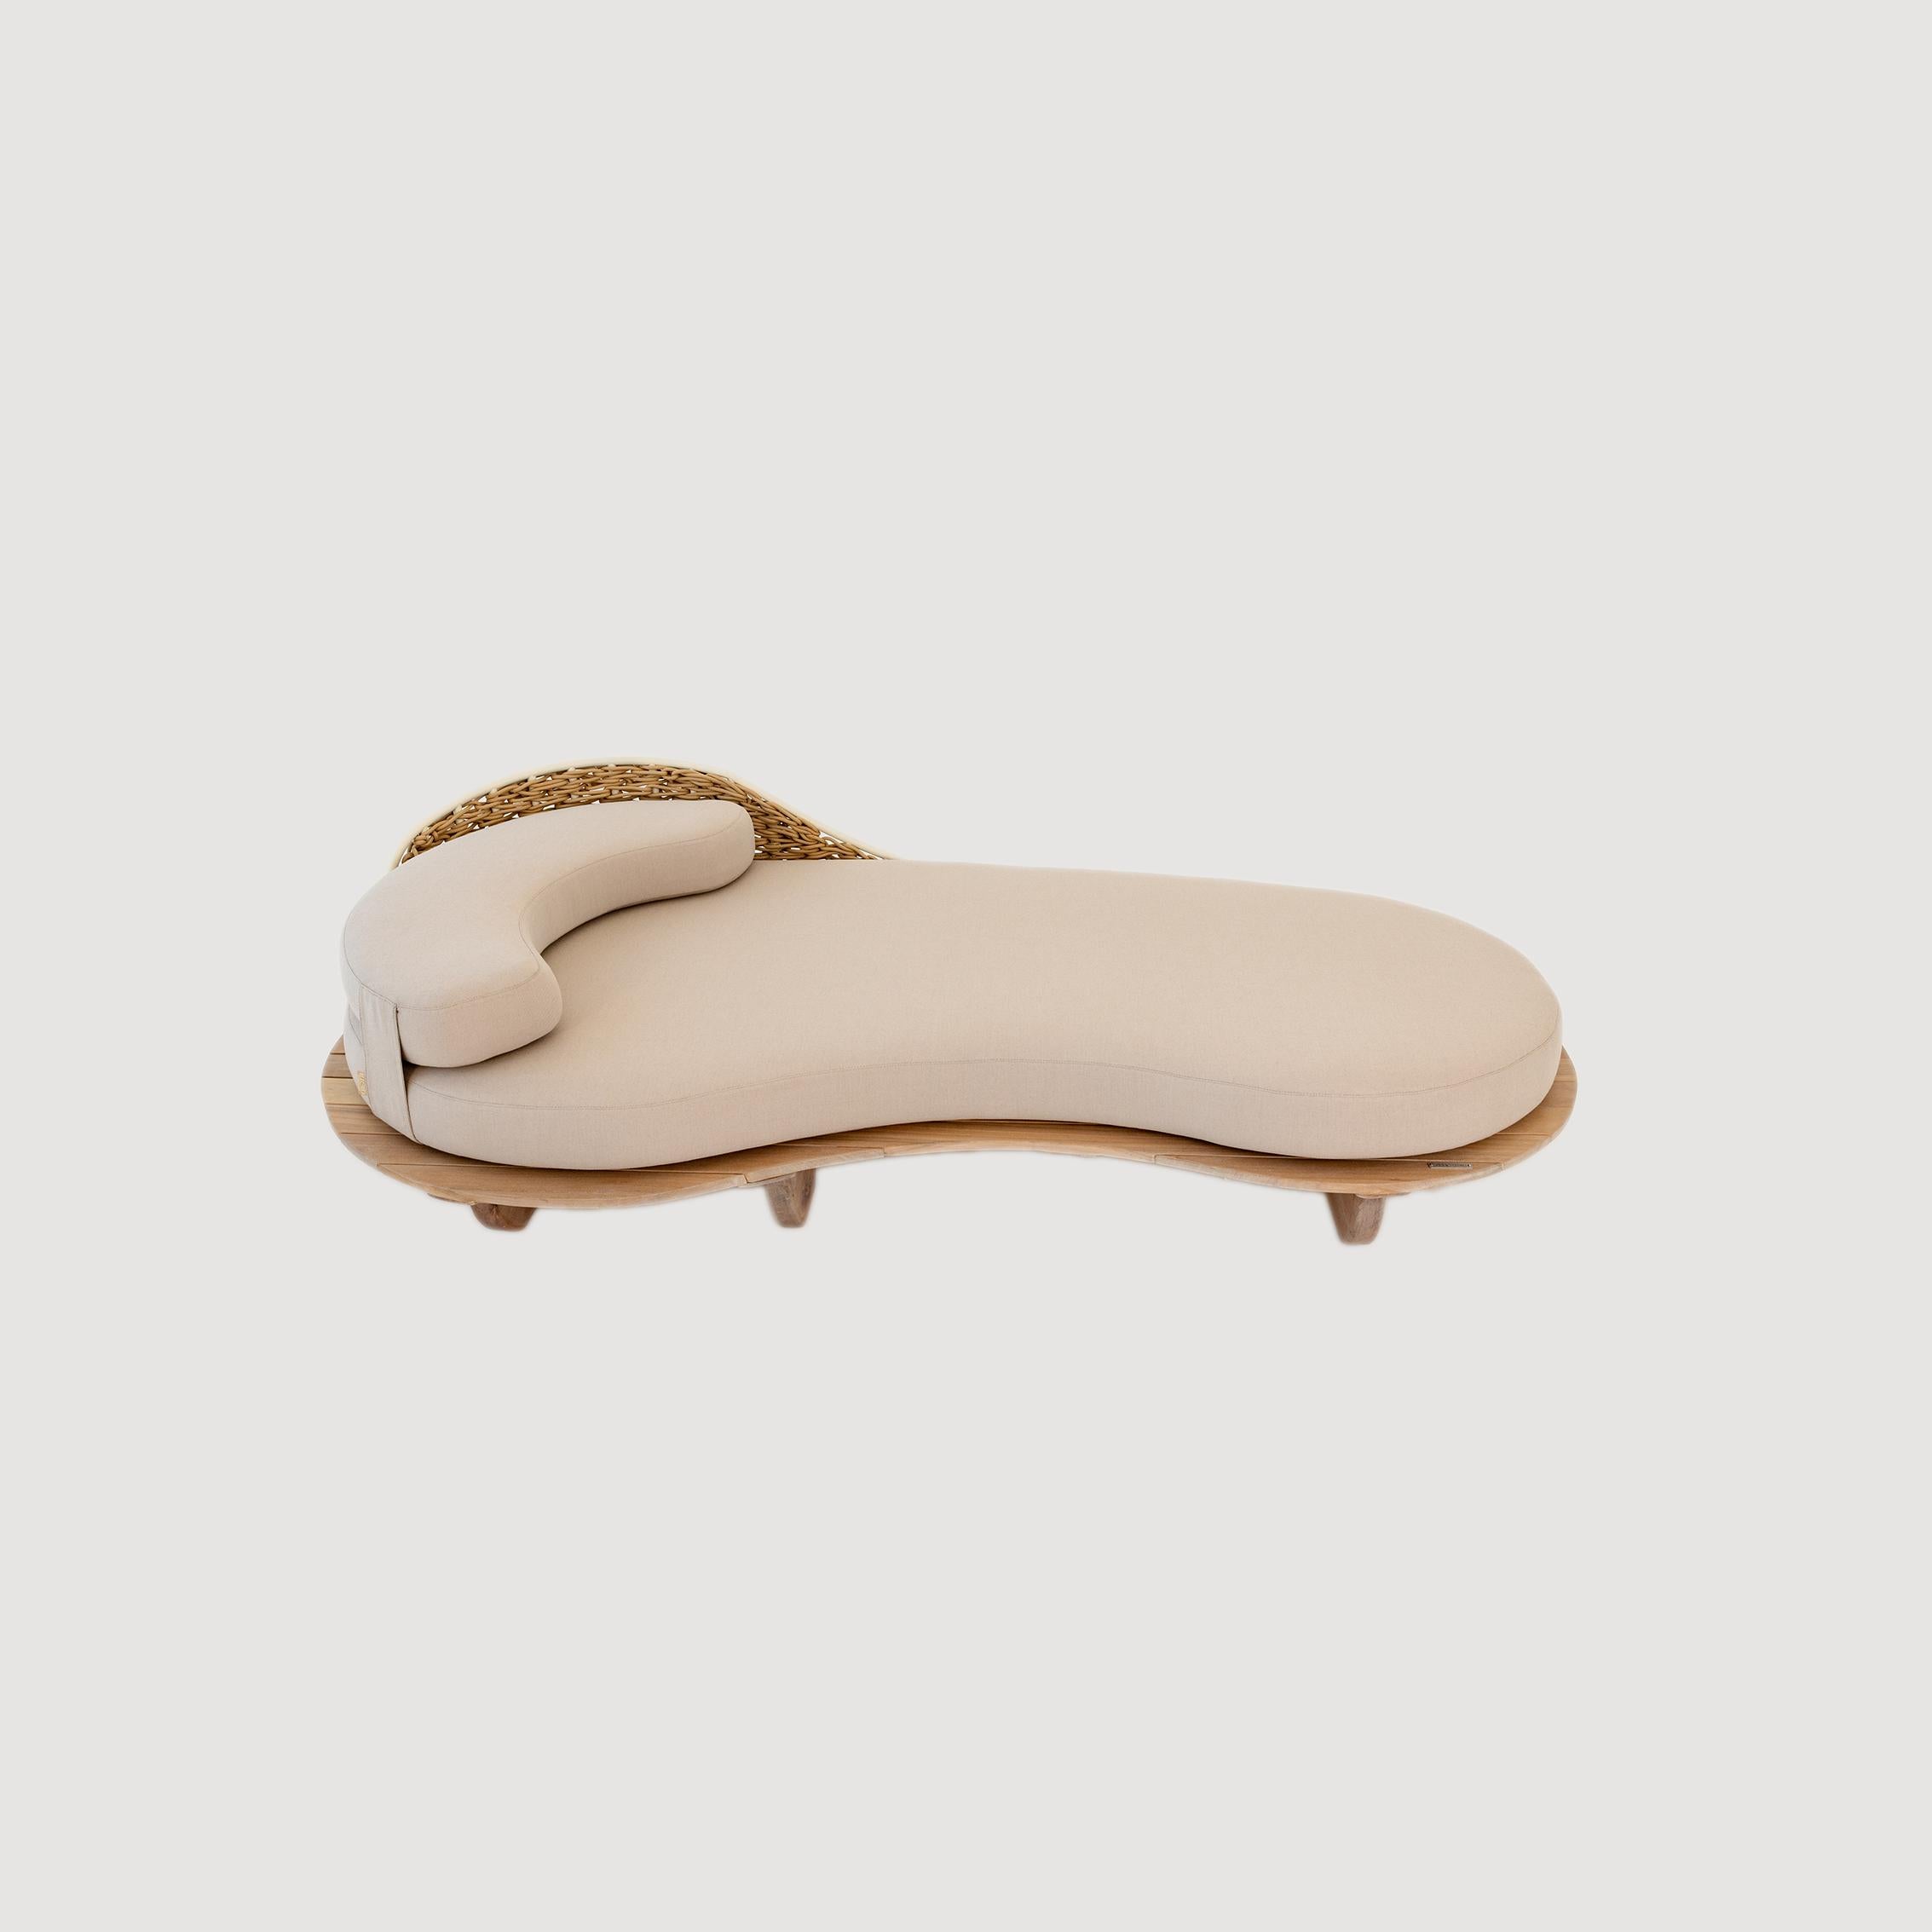 The Sayari Indoor / Outdoor Daybed Chaise and Table Kollektion von Studio Lloyd (Polster) im Angebot